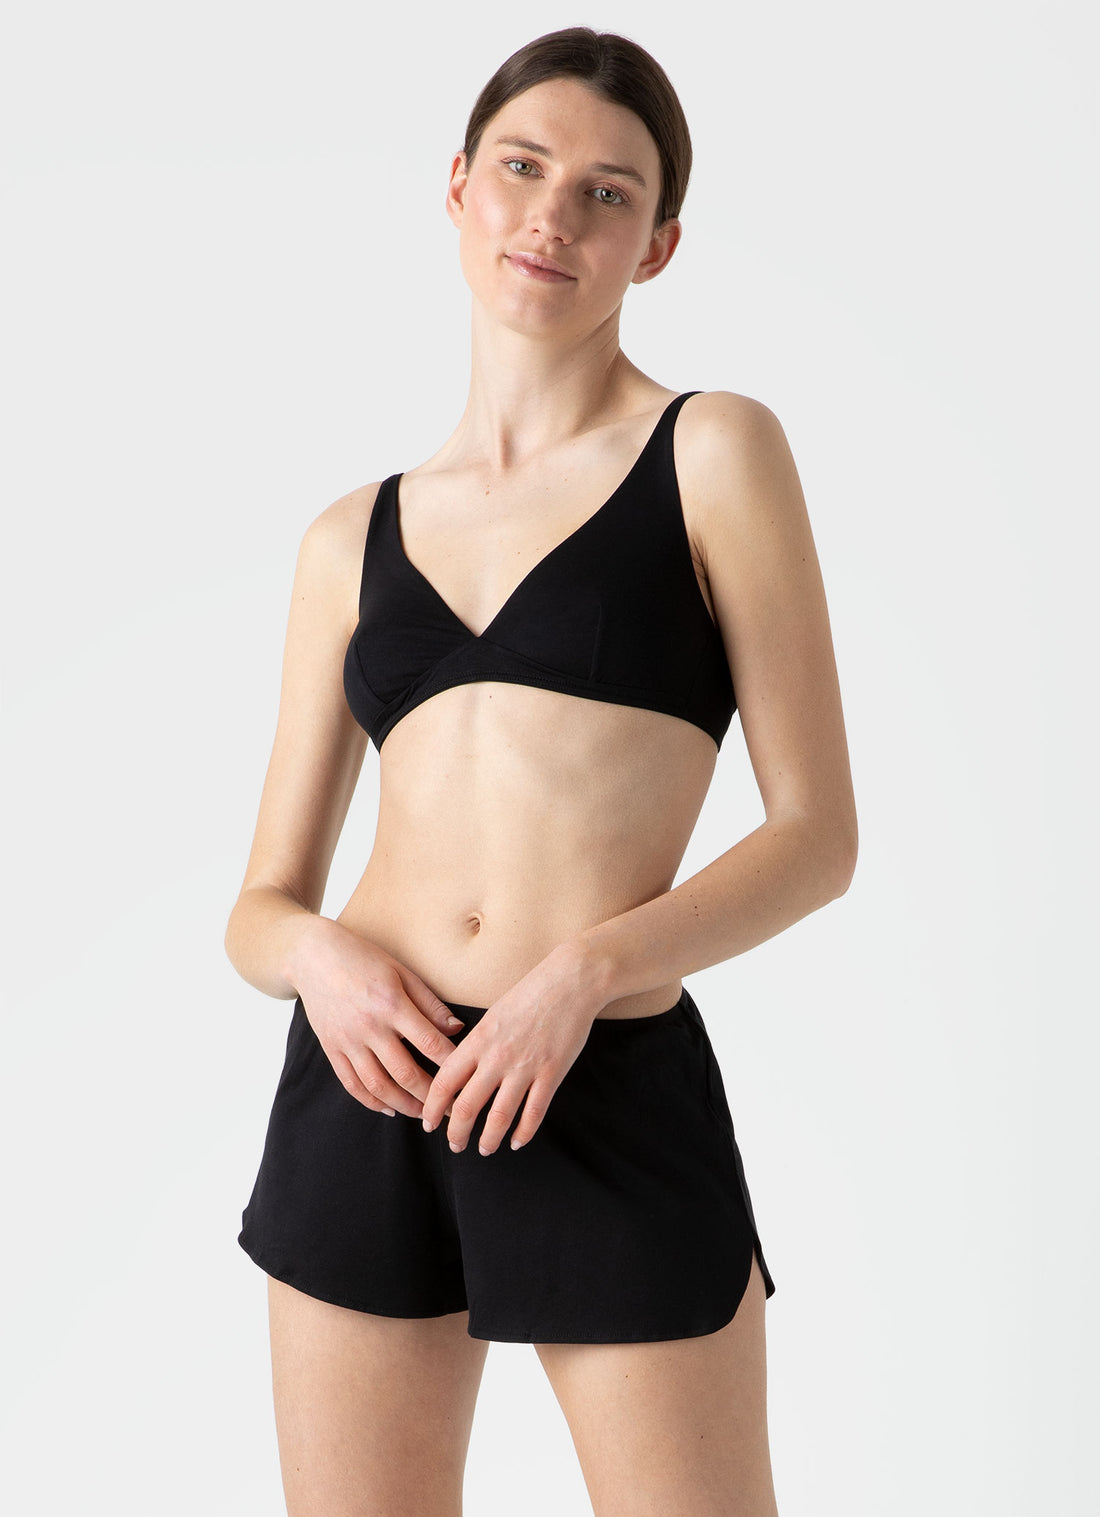 Women's French Knickers